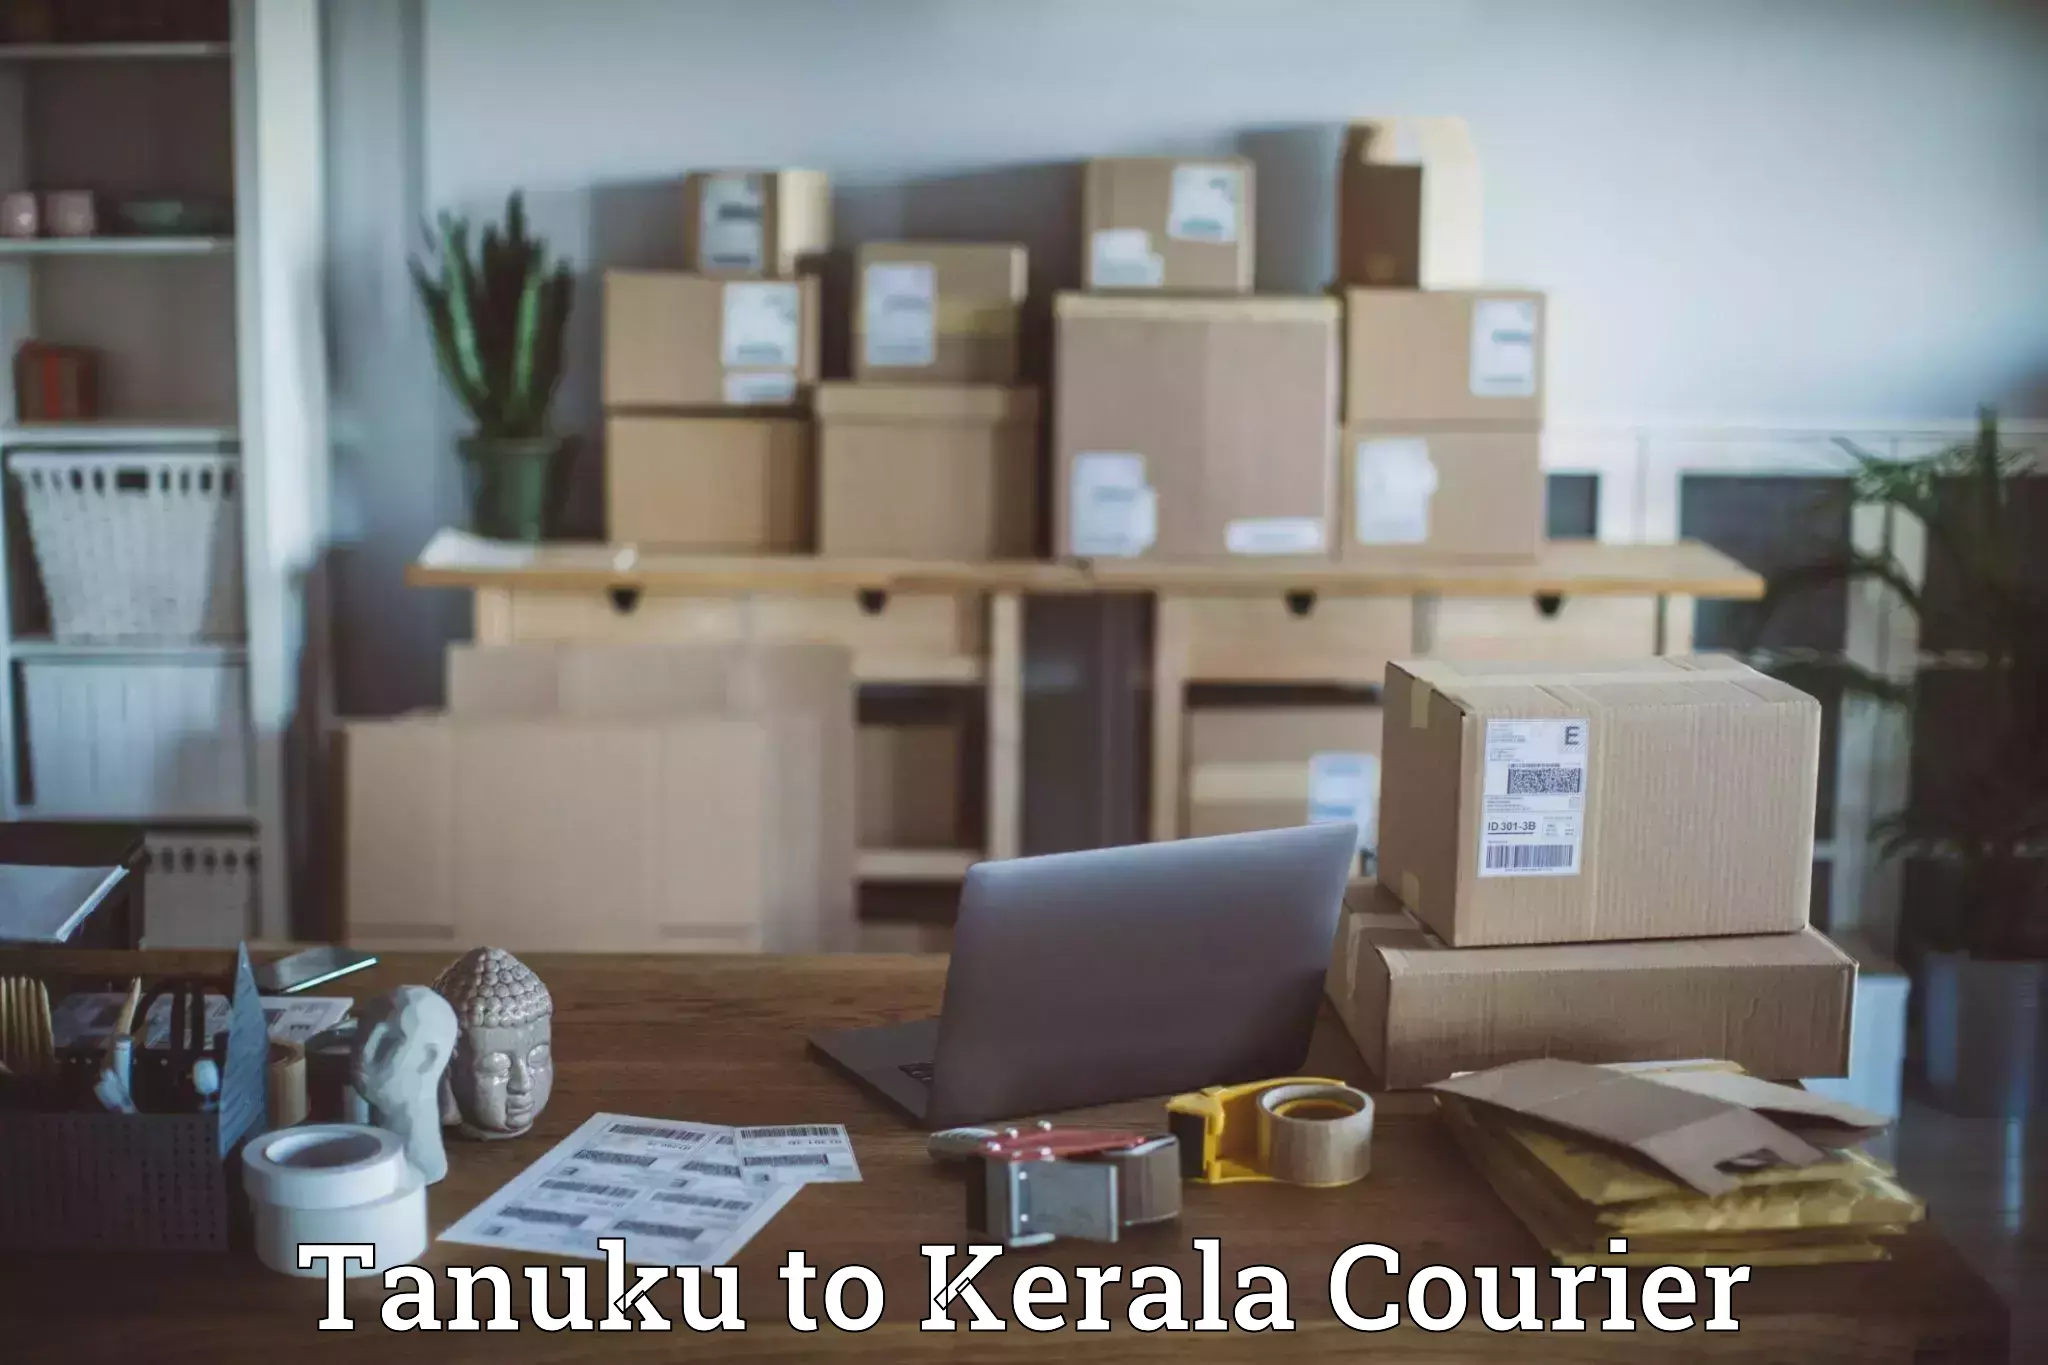 End-to-end delivery Tanuku to Kerala